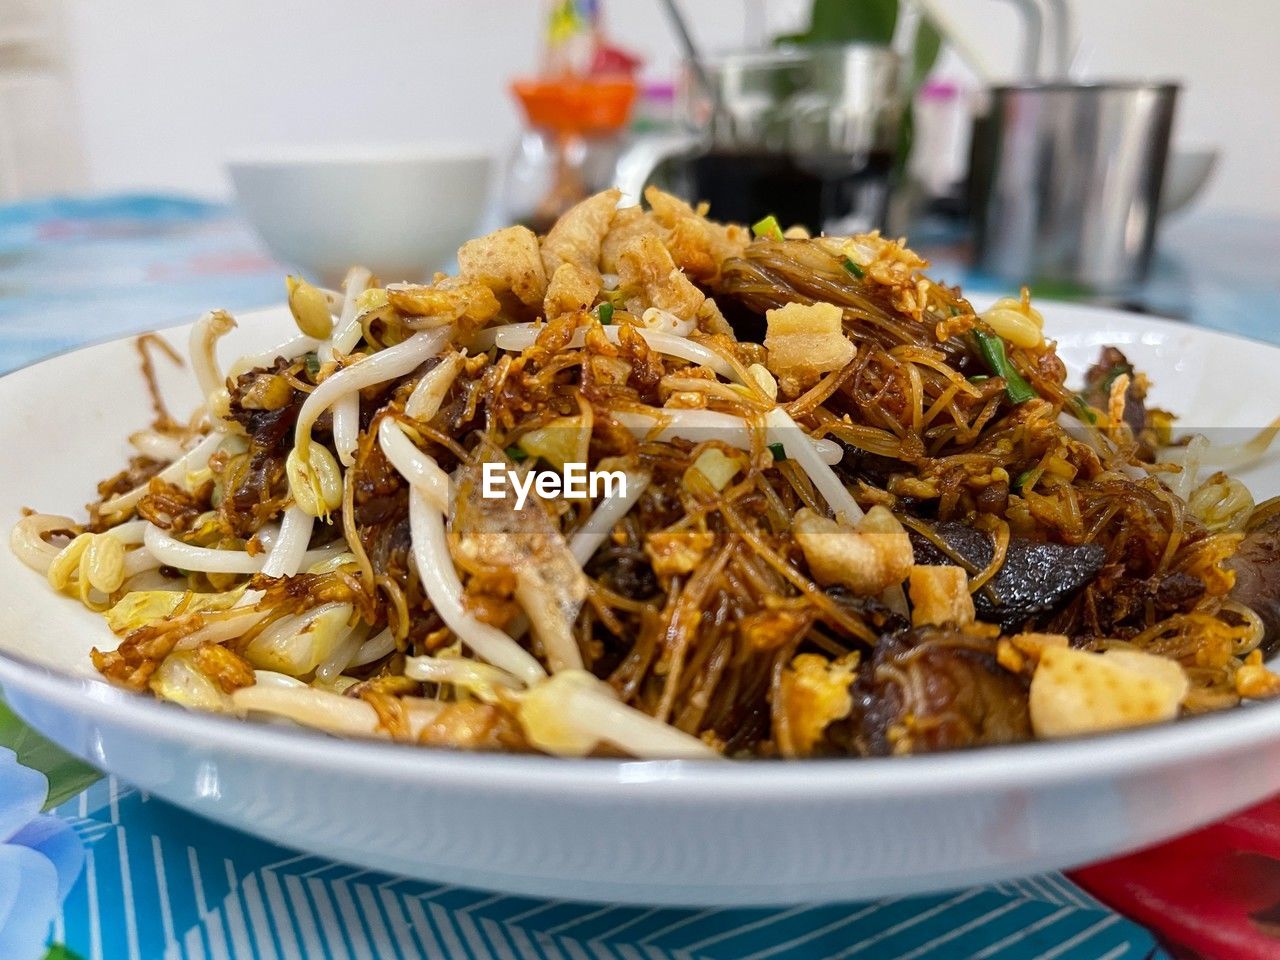 food, food and drink, dish, healthy eating, plate, thai food, cuisine, wellbeing, meal, italian food, no people, indoors, pasta, freshness, fried, table, chinese food, produce, close-up, vegetable, crockery, fried noodles, vegetarian food, focus on foreground, fruit, pad thai